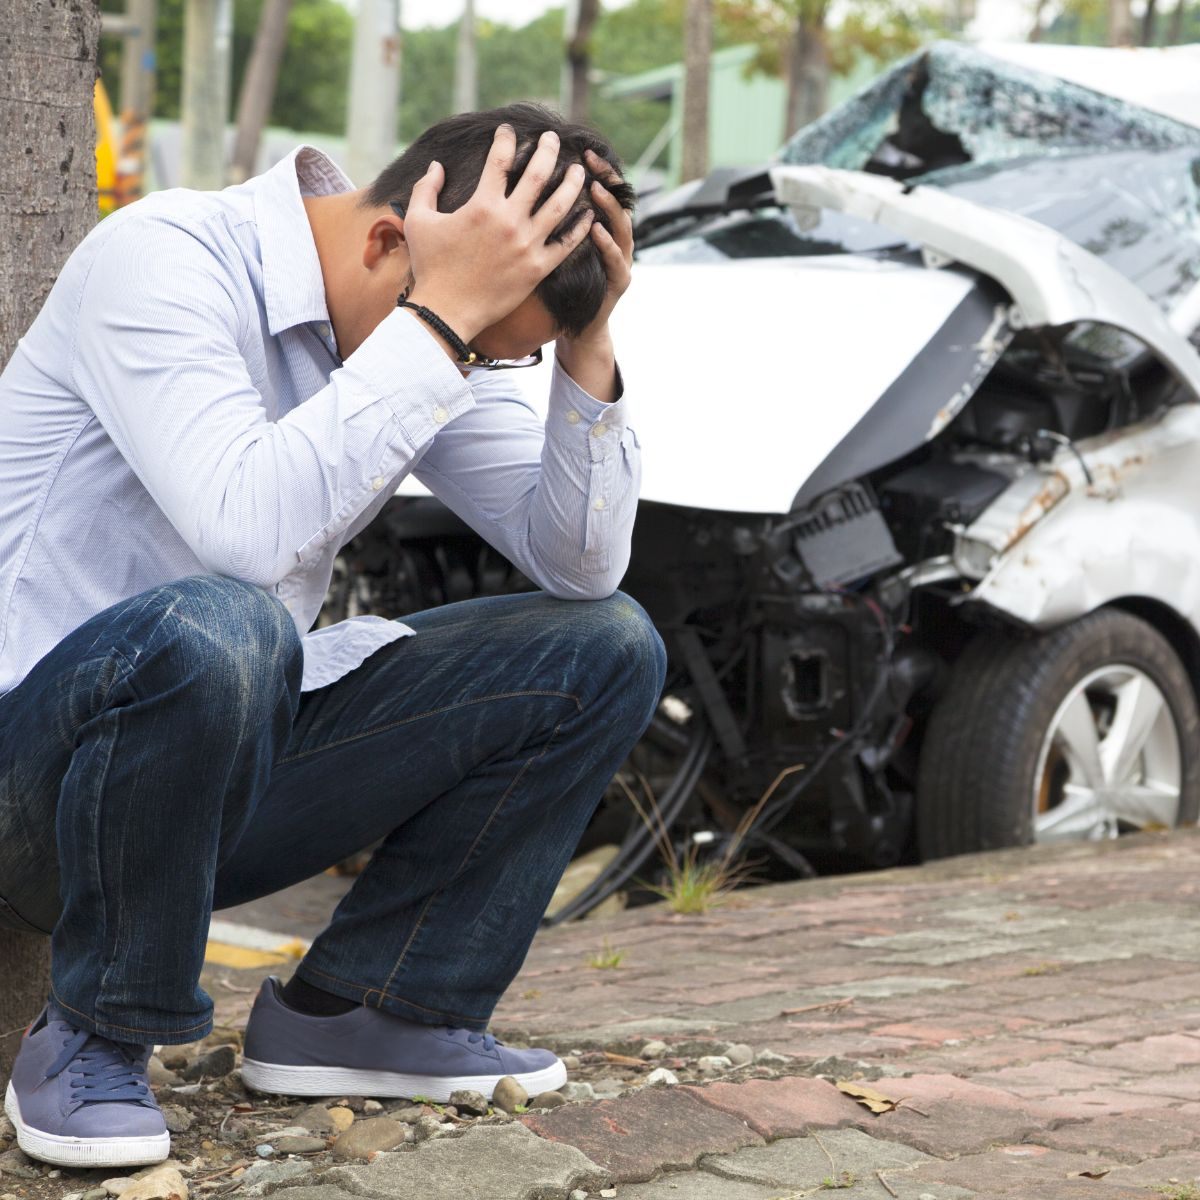 fatal car accident dream meaning